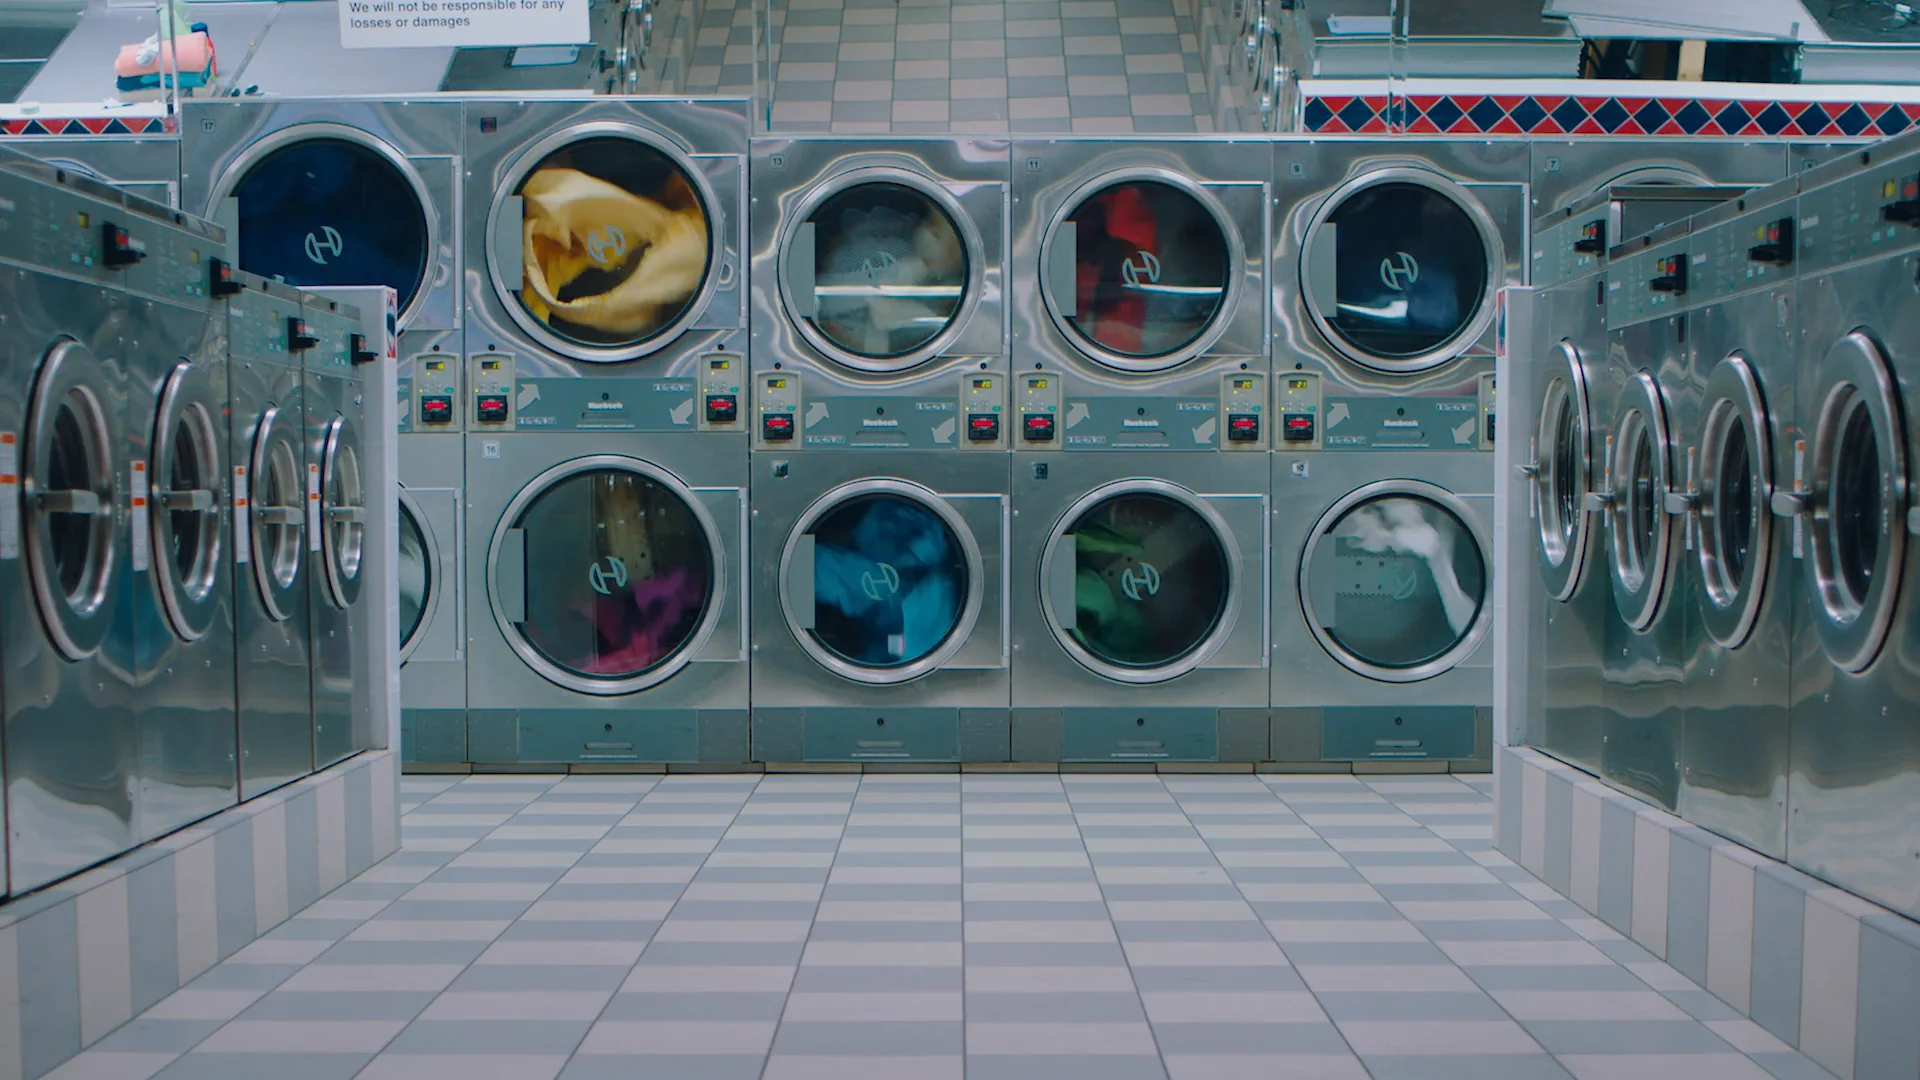 Wash and Dry Cycles are both Wad-Free® on Vimeo